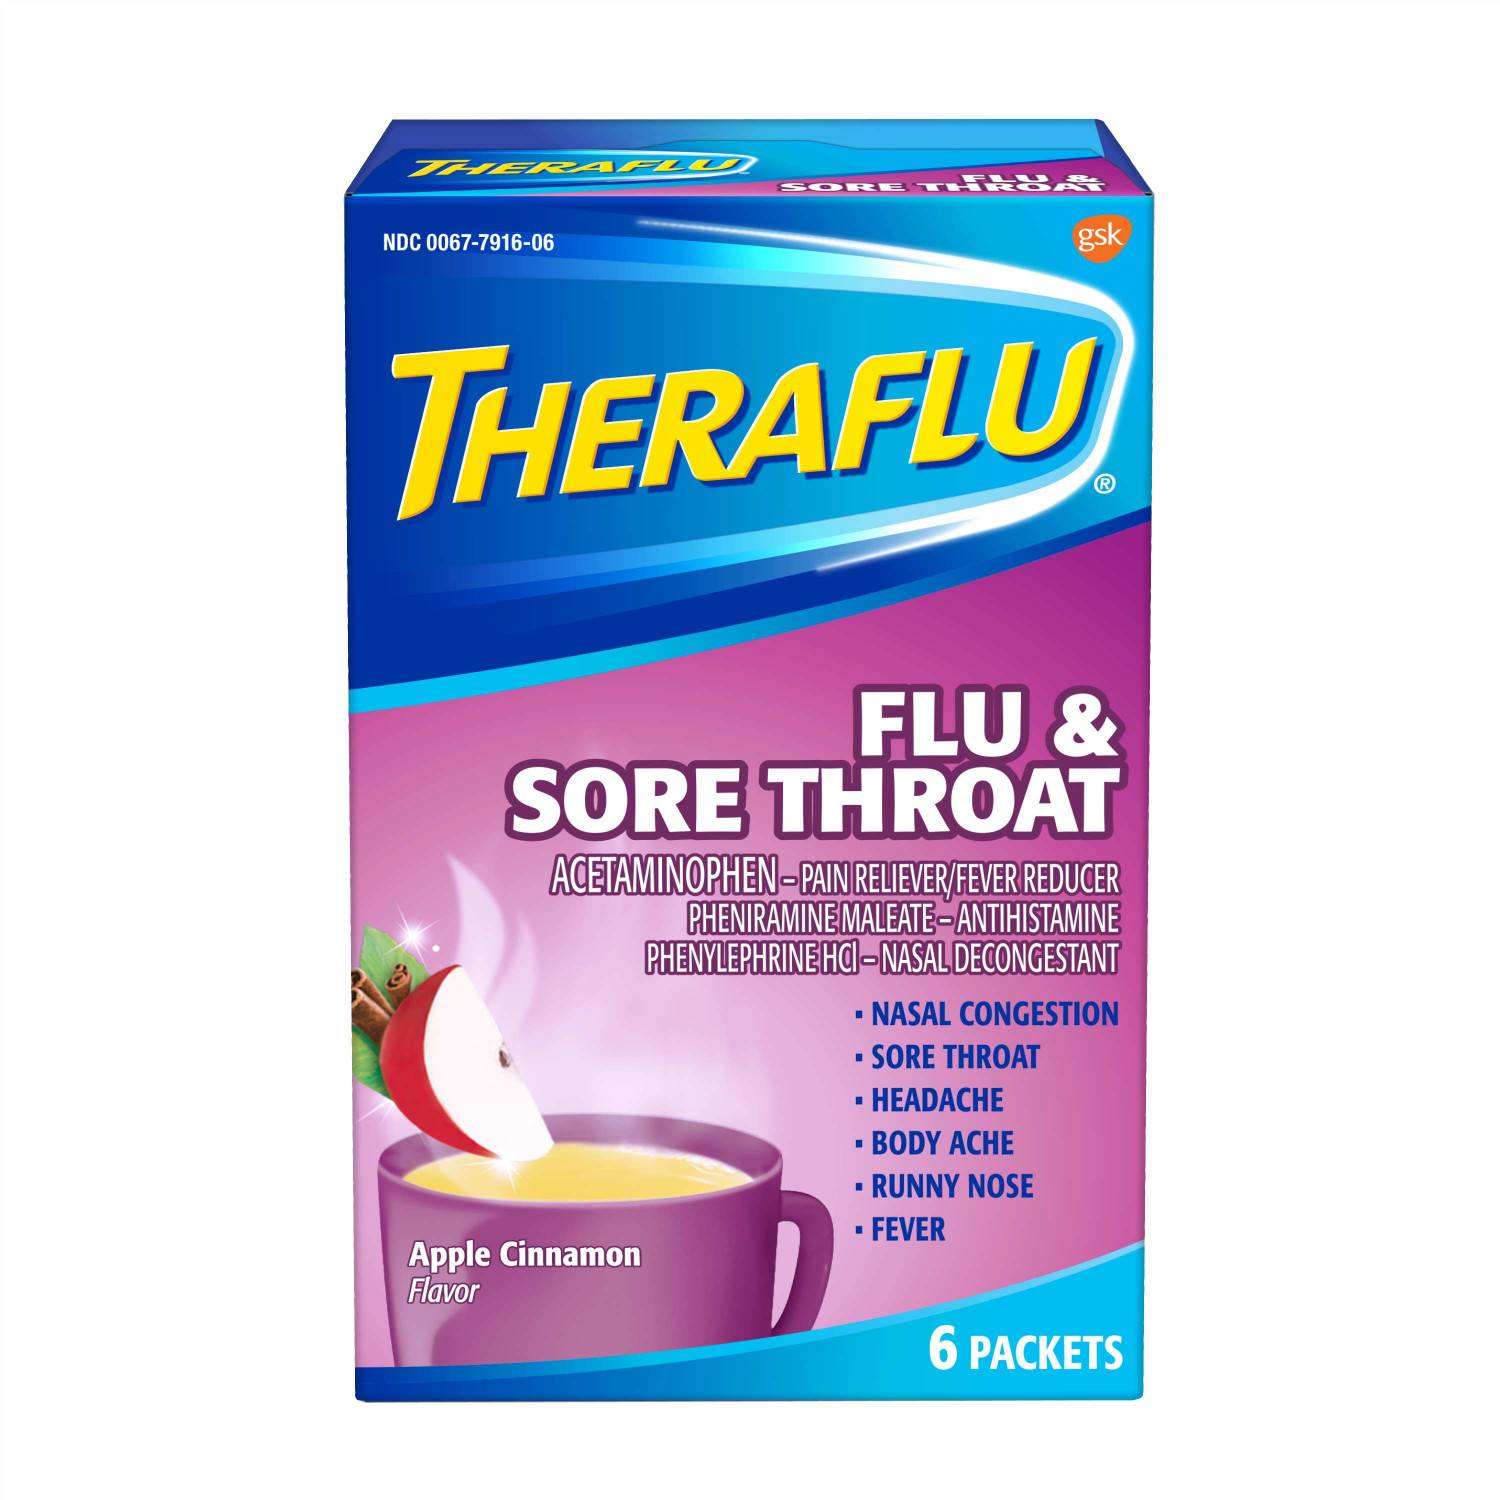 The 8 Best Medicines for a Sore Throat of 2019